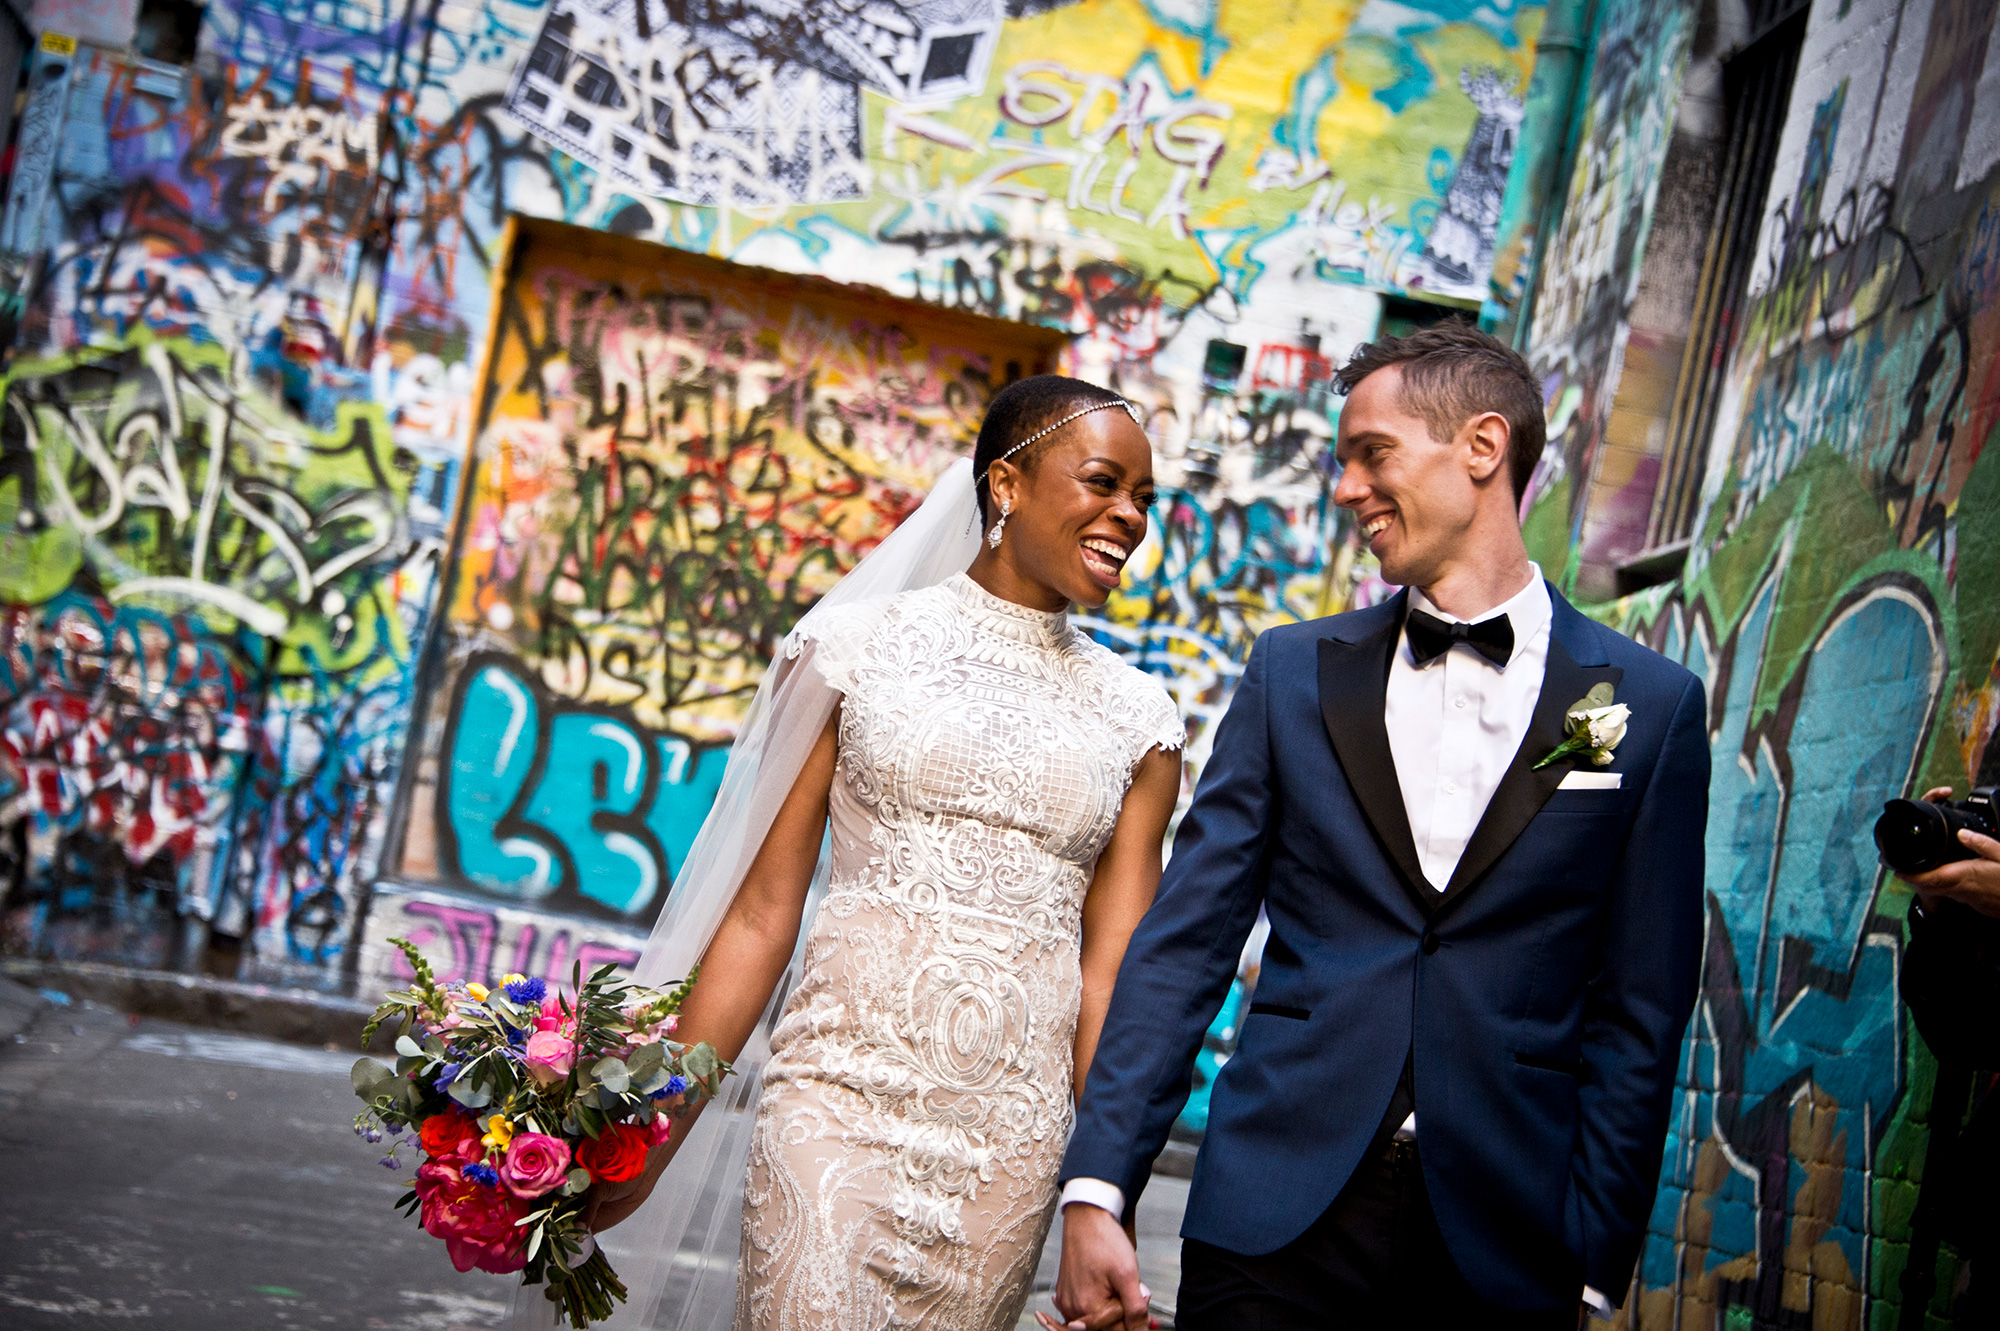 Nneka_Bill_Colorful-Cultural-Wedding_Chris-Clinnick-Photography_029